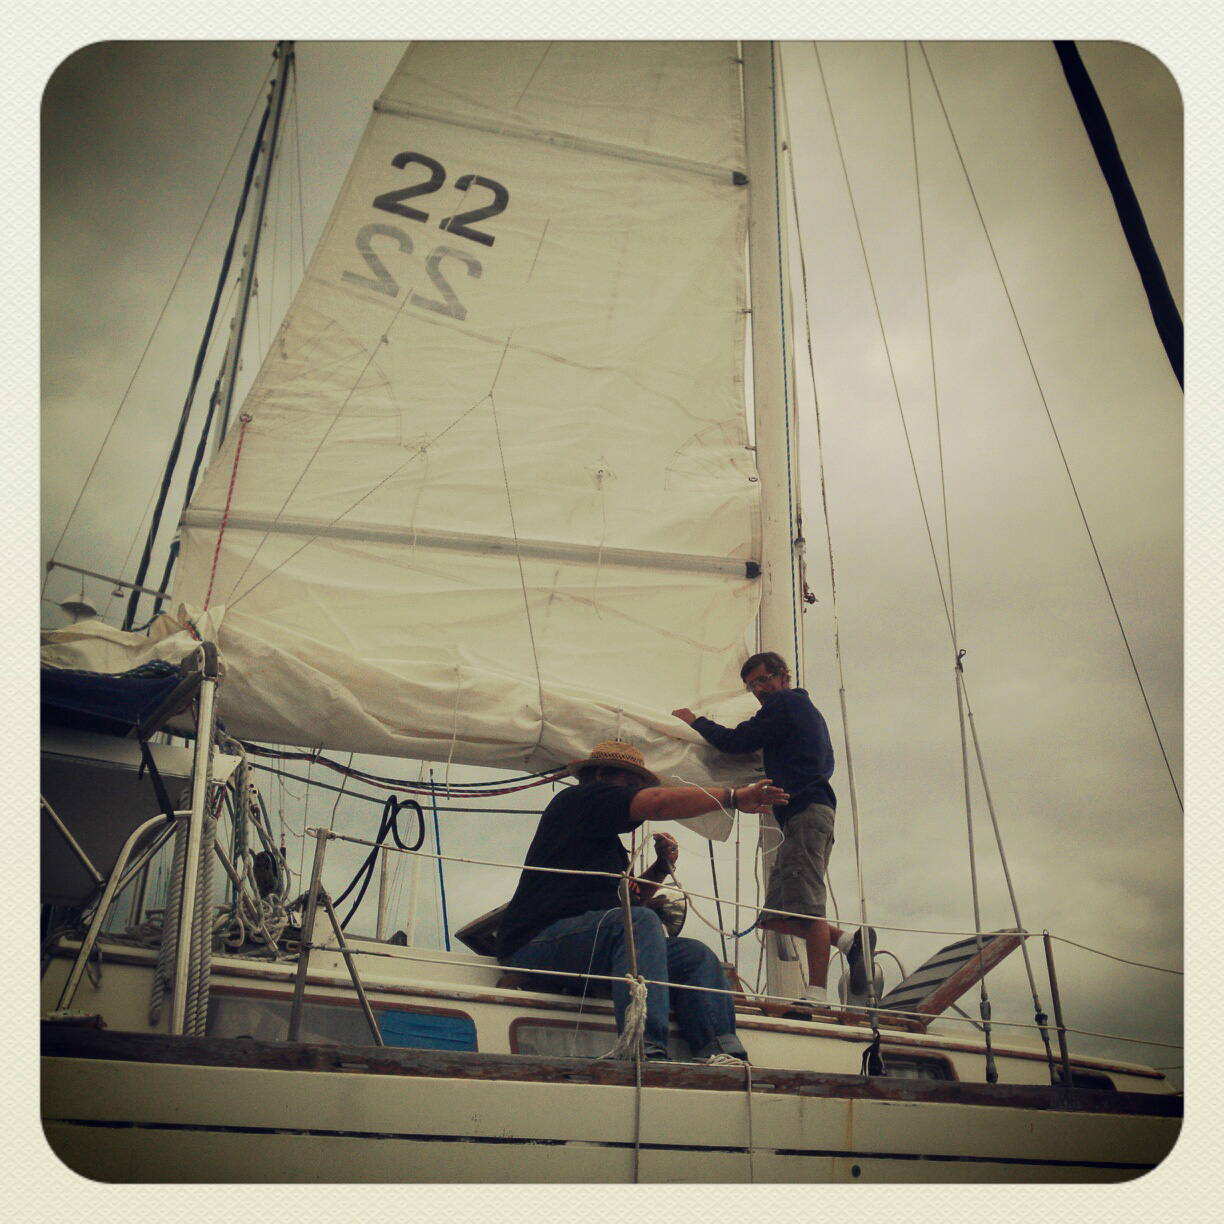 Checking out a friend's boat in key west_02-28-2013_002.jpg